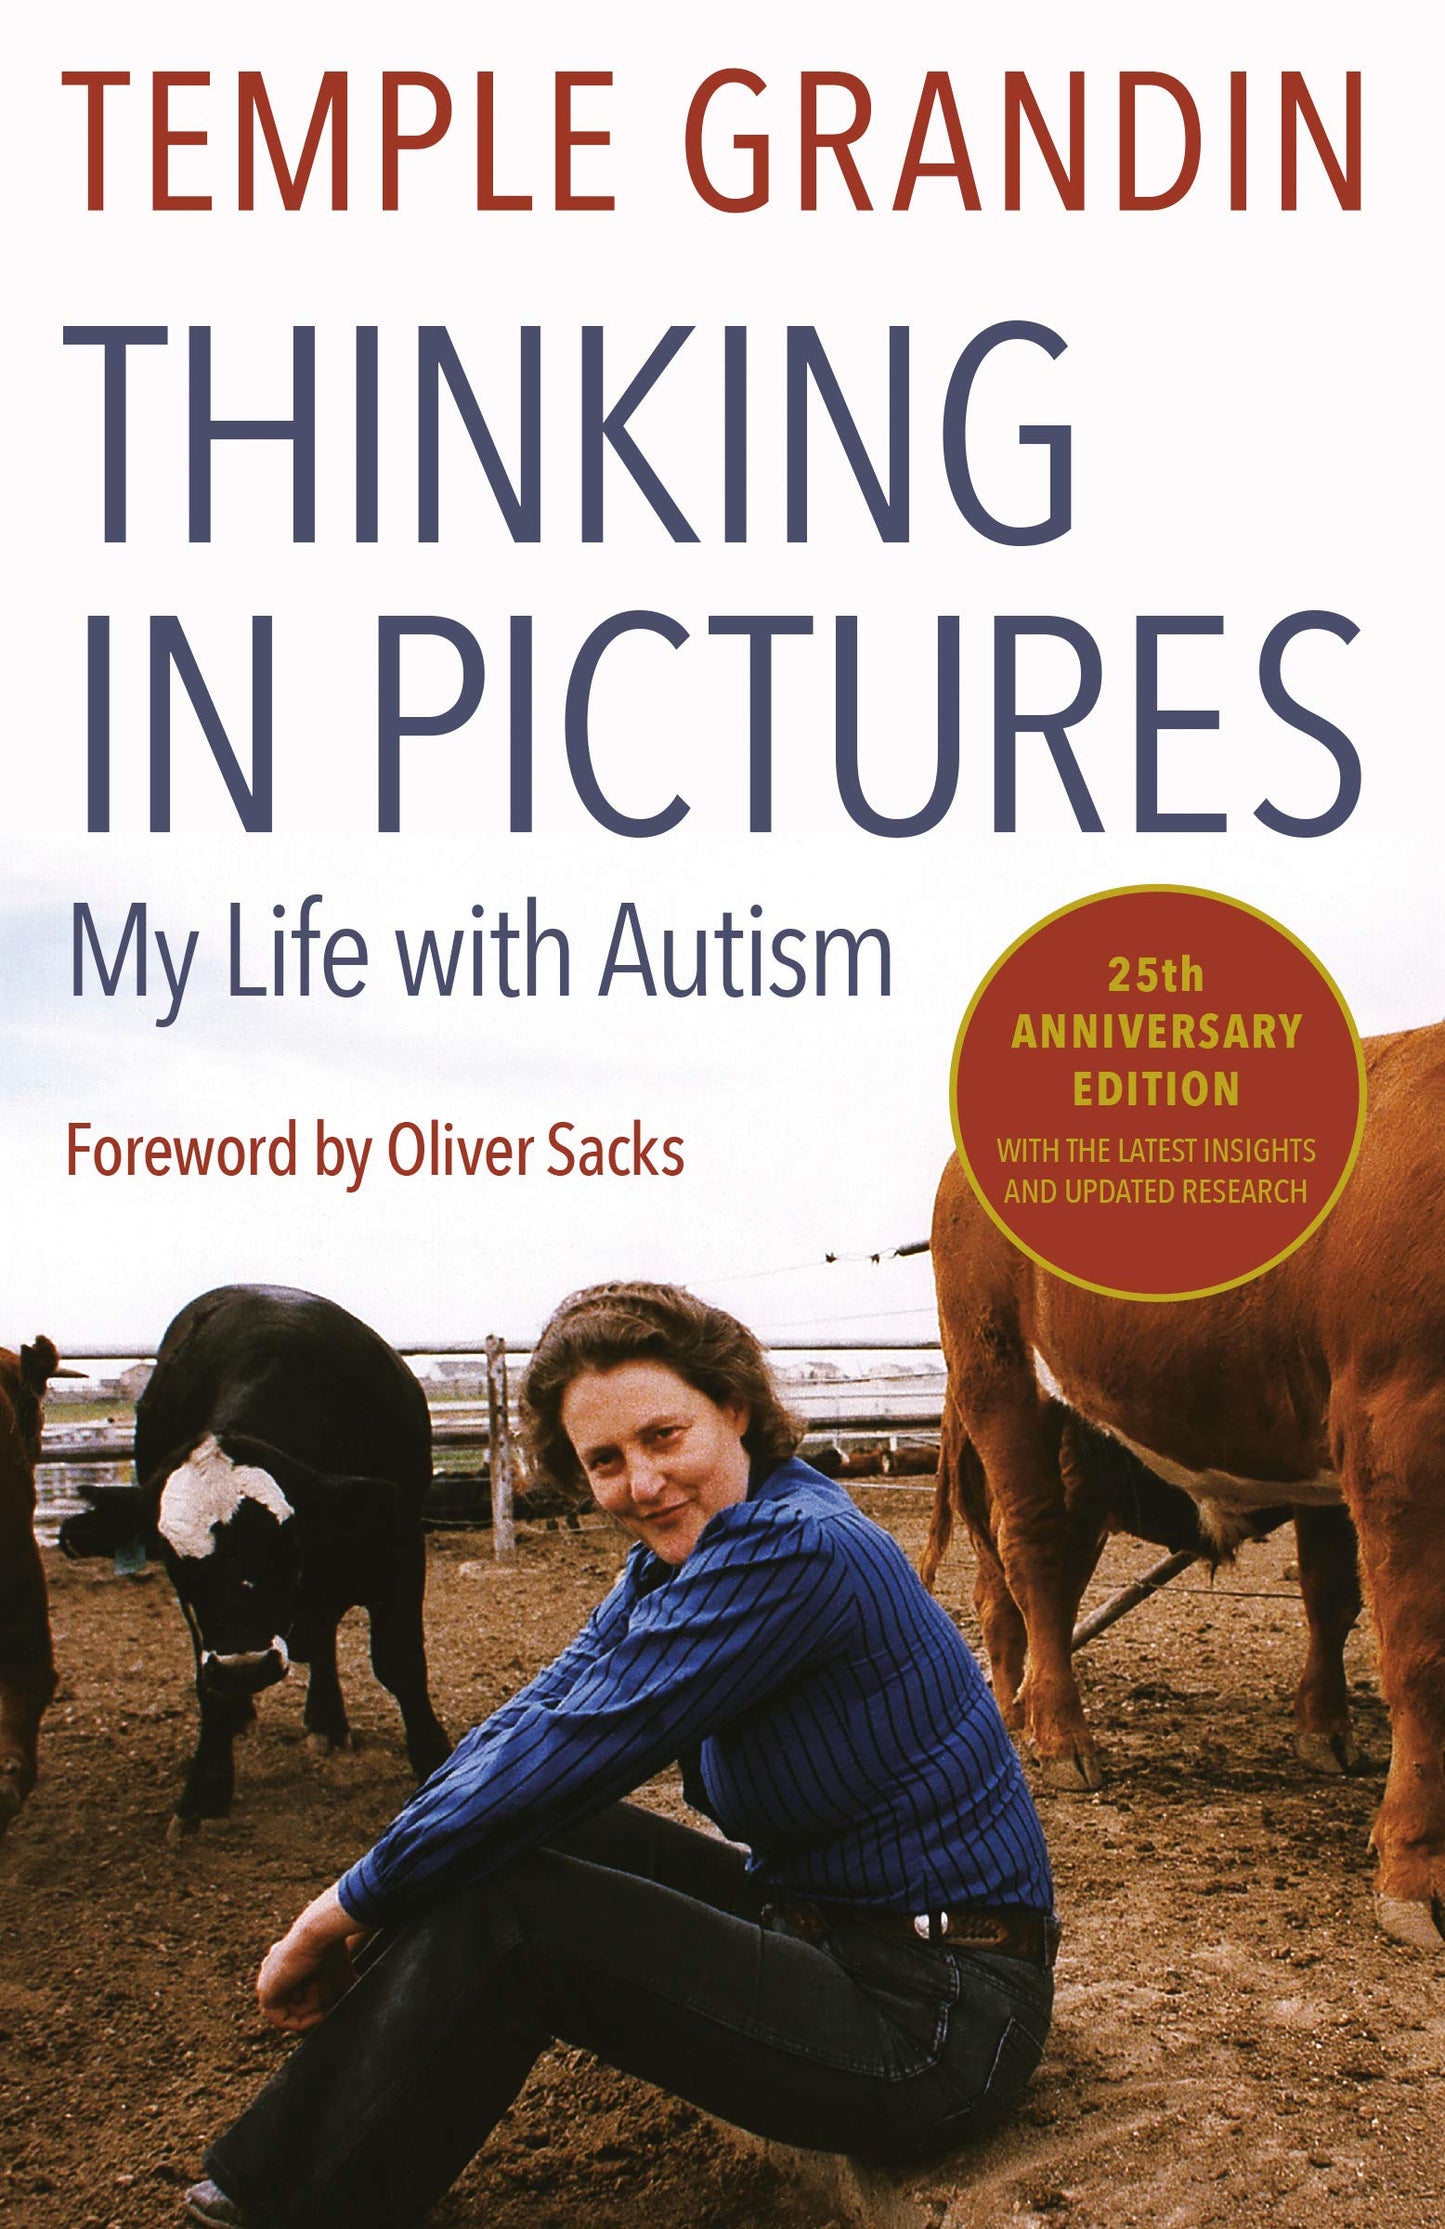 Thinking in Pictures: My Life with Autism by Temple Grandin